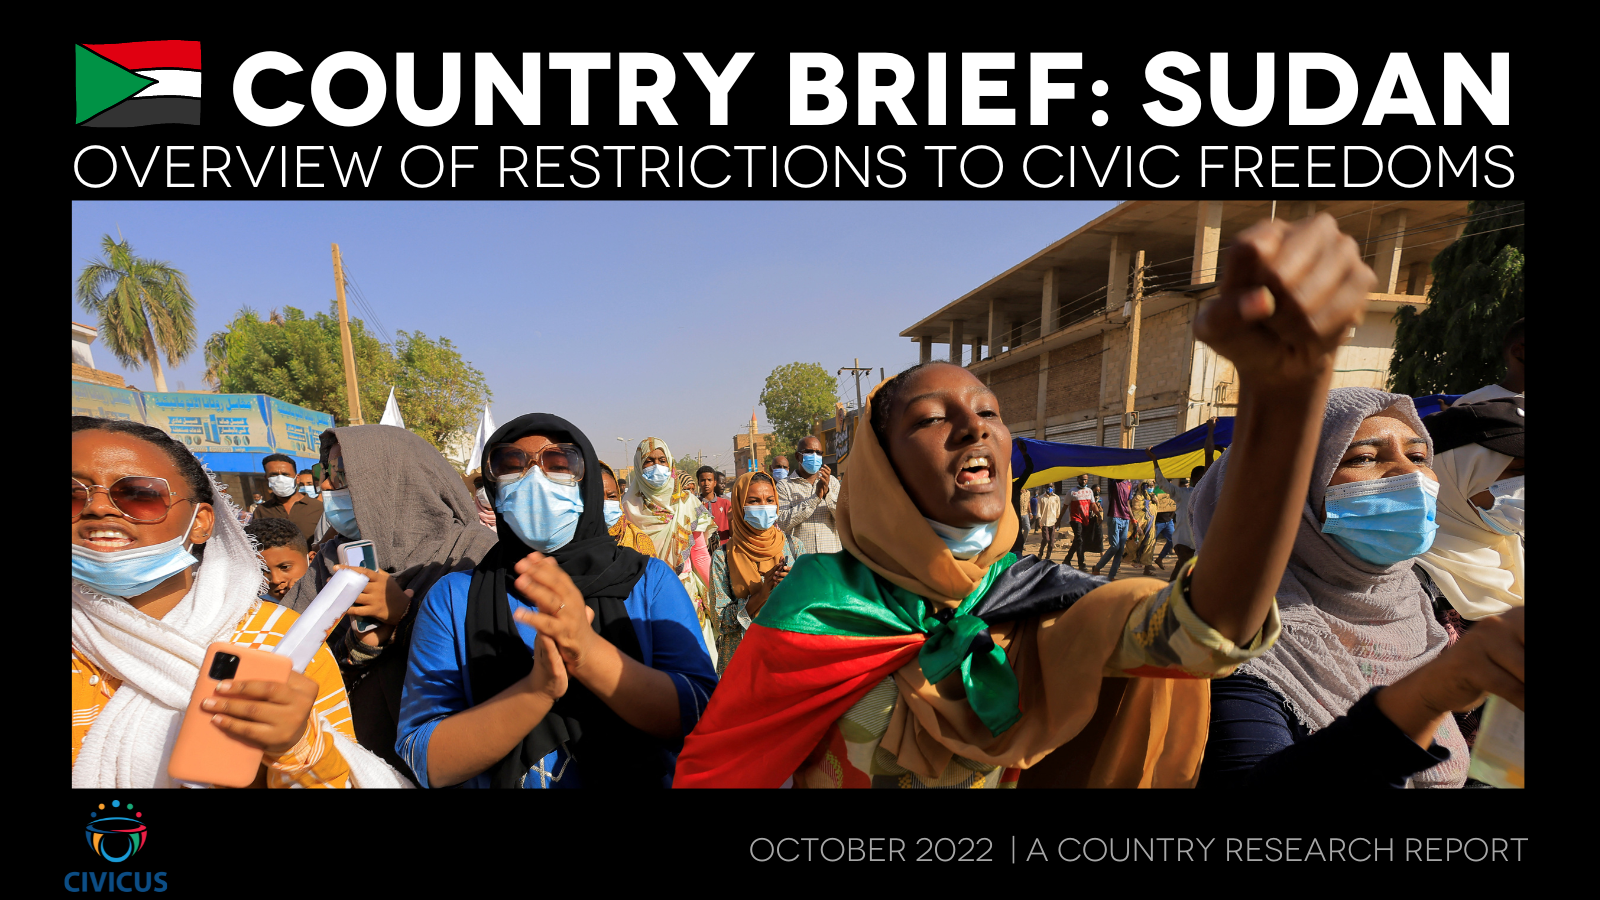 New Research brief on Sudan documents ongoing violations in the aftermath of the Coup